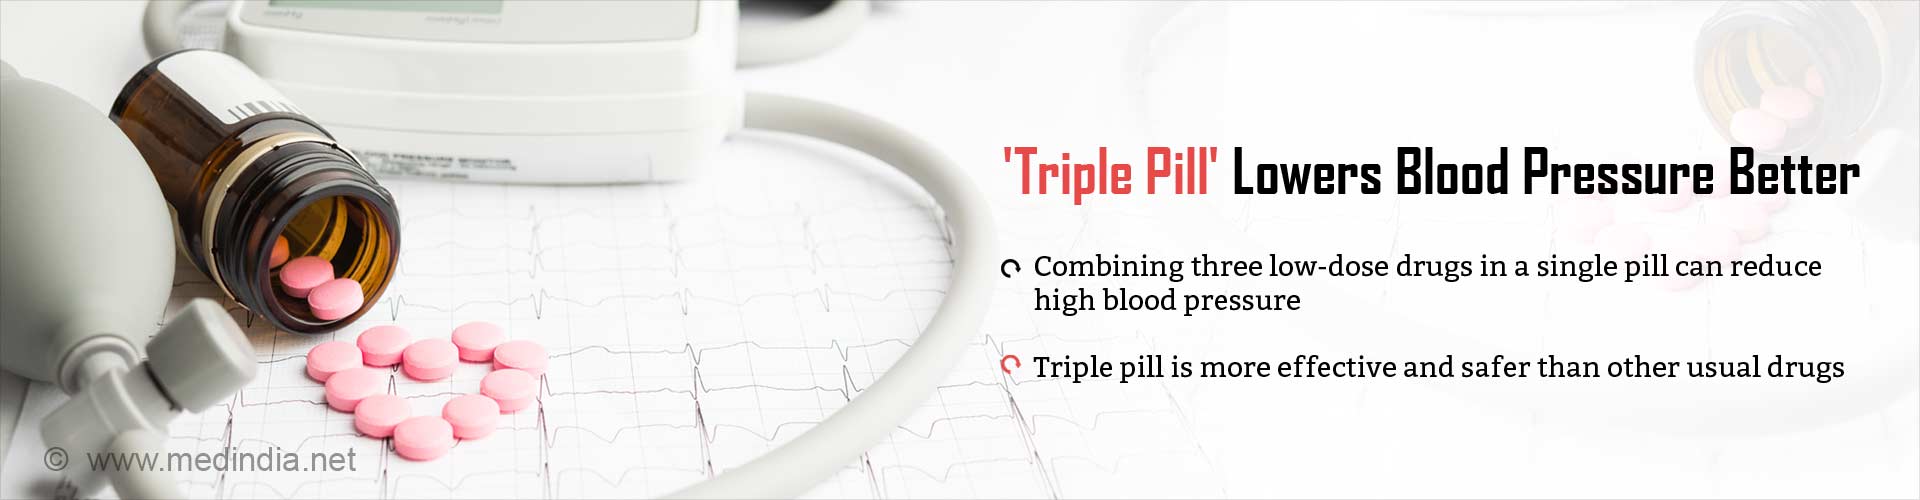 triple pill lowers blood pressure better
- combining three-low-dose drugs in a single pill can reduce high blood pressure
- triple pill is more effective and safer than other usual drugs